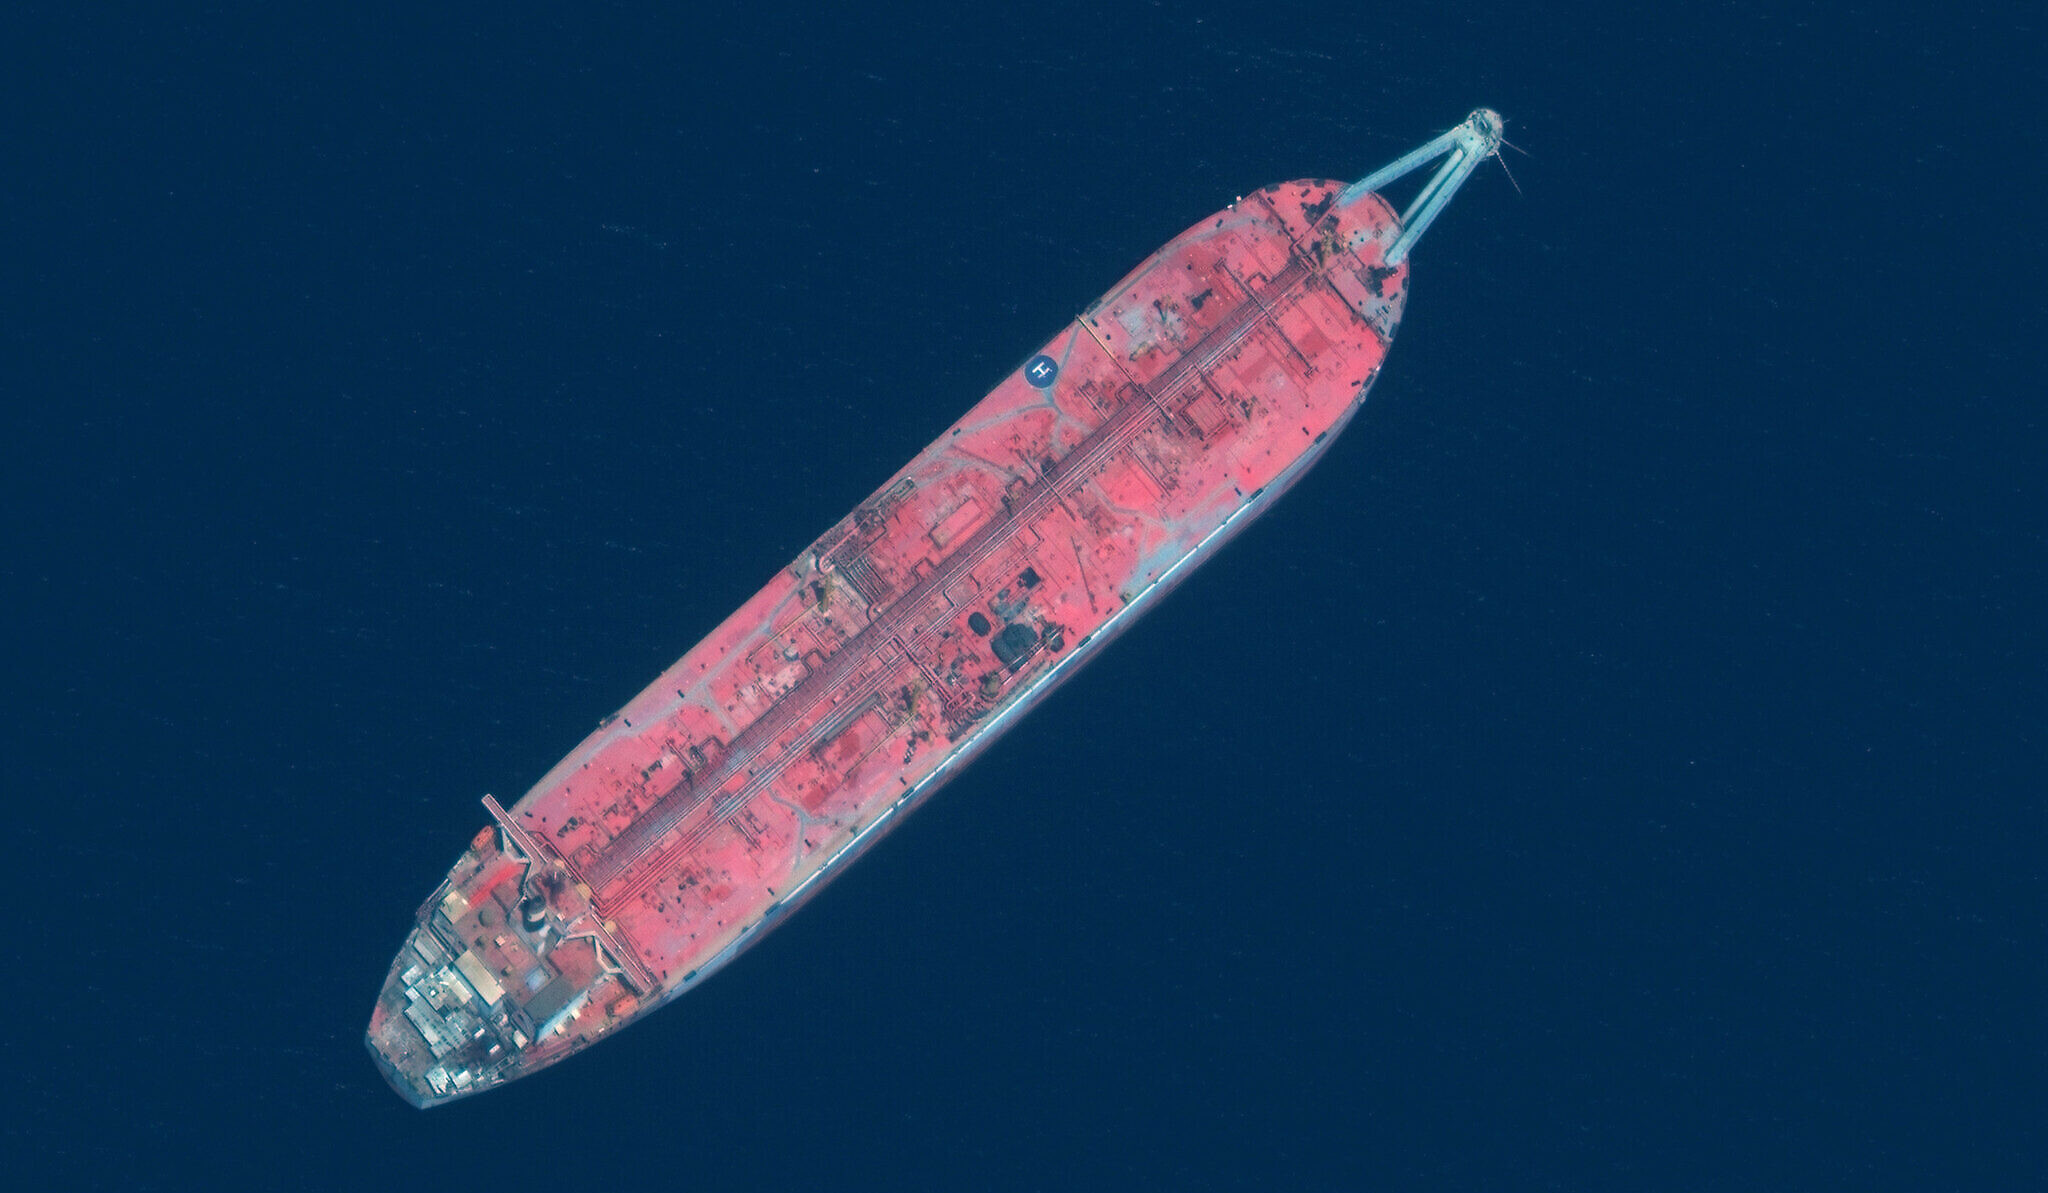 Group warns of potential catastrophe on old tanker off Yemen